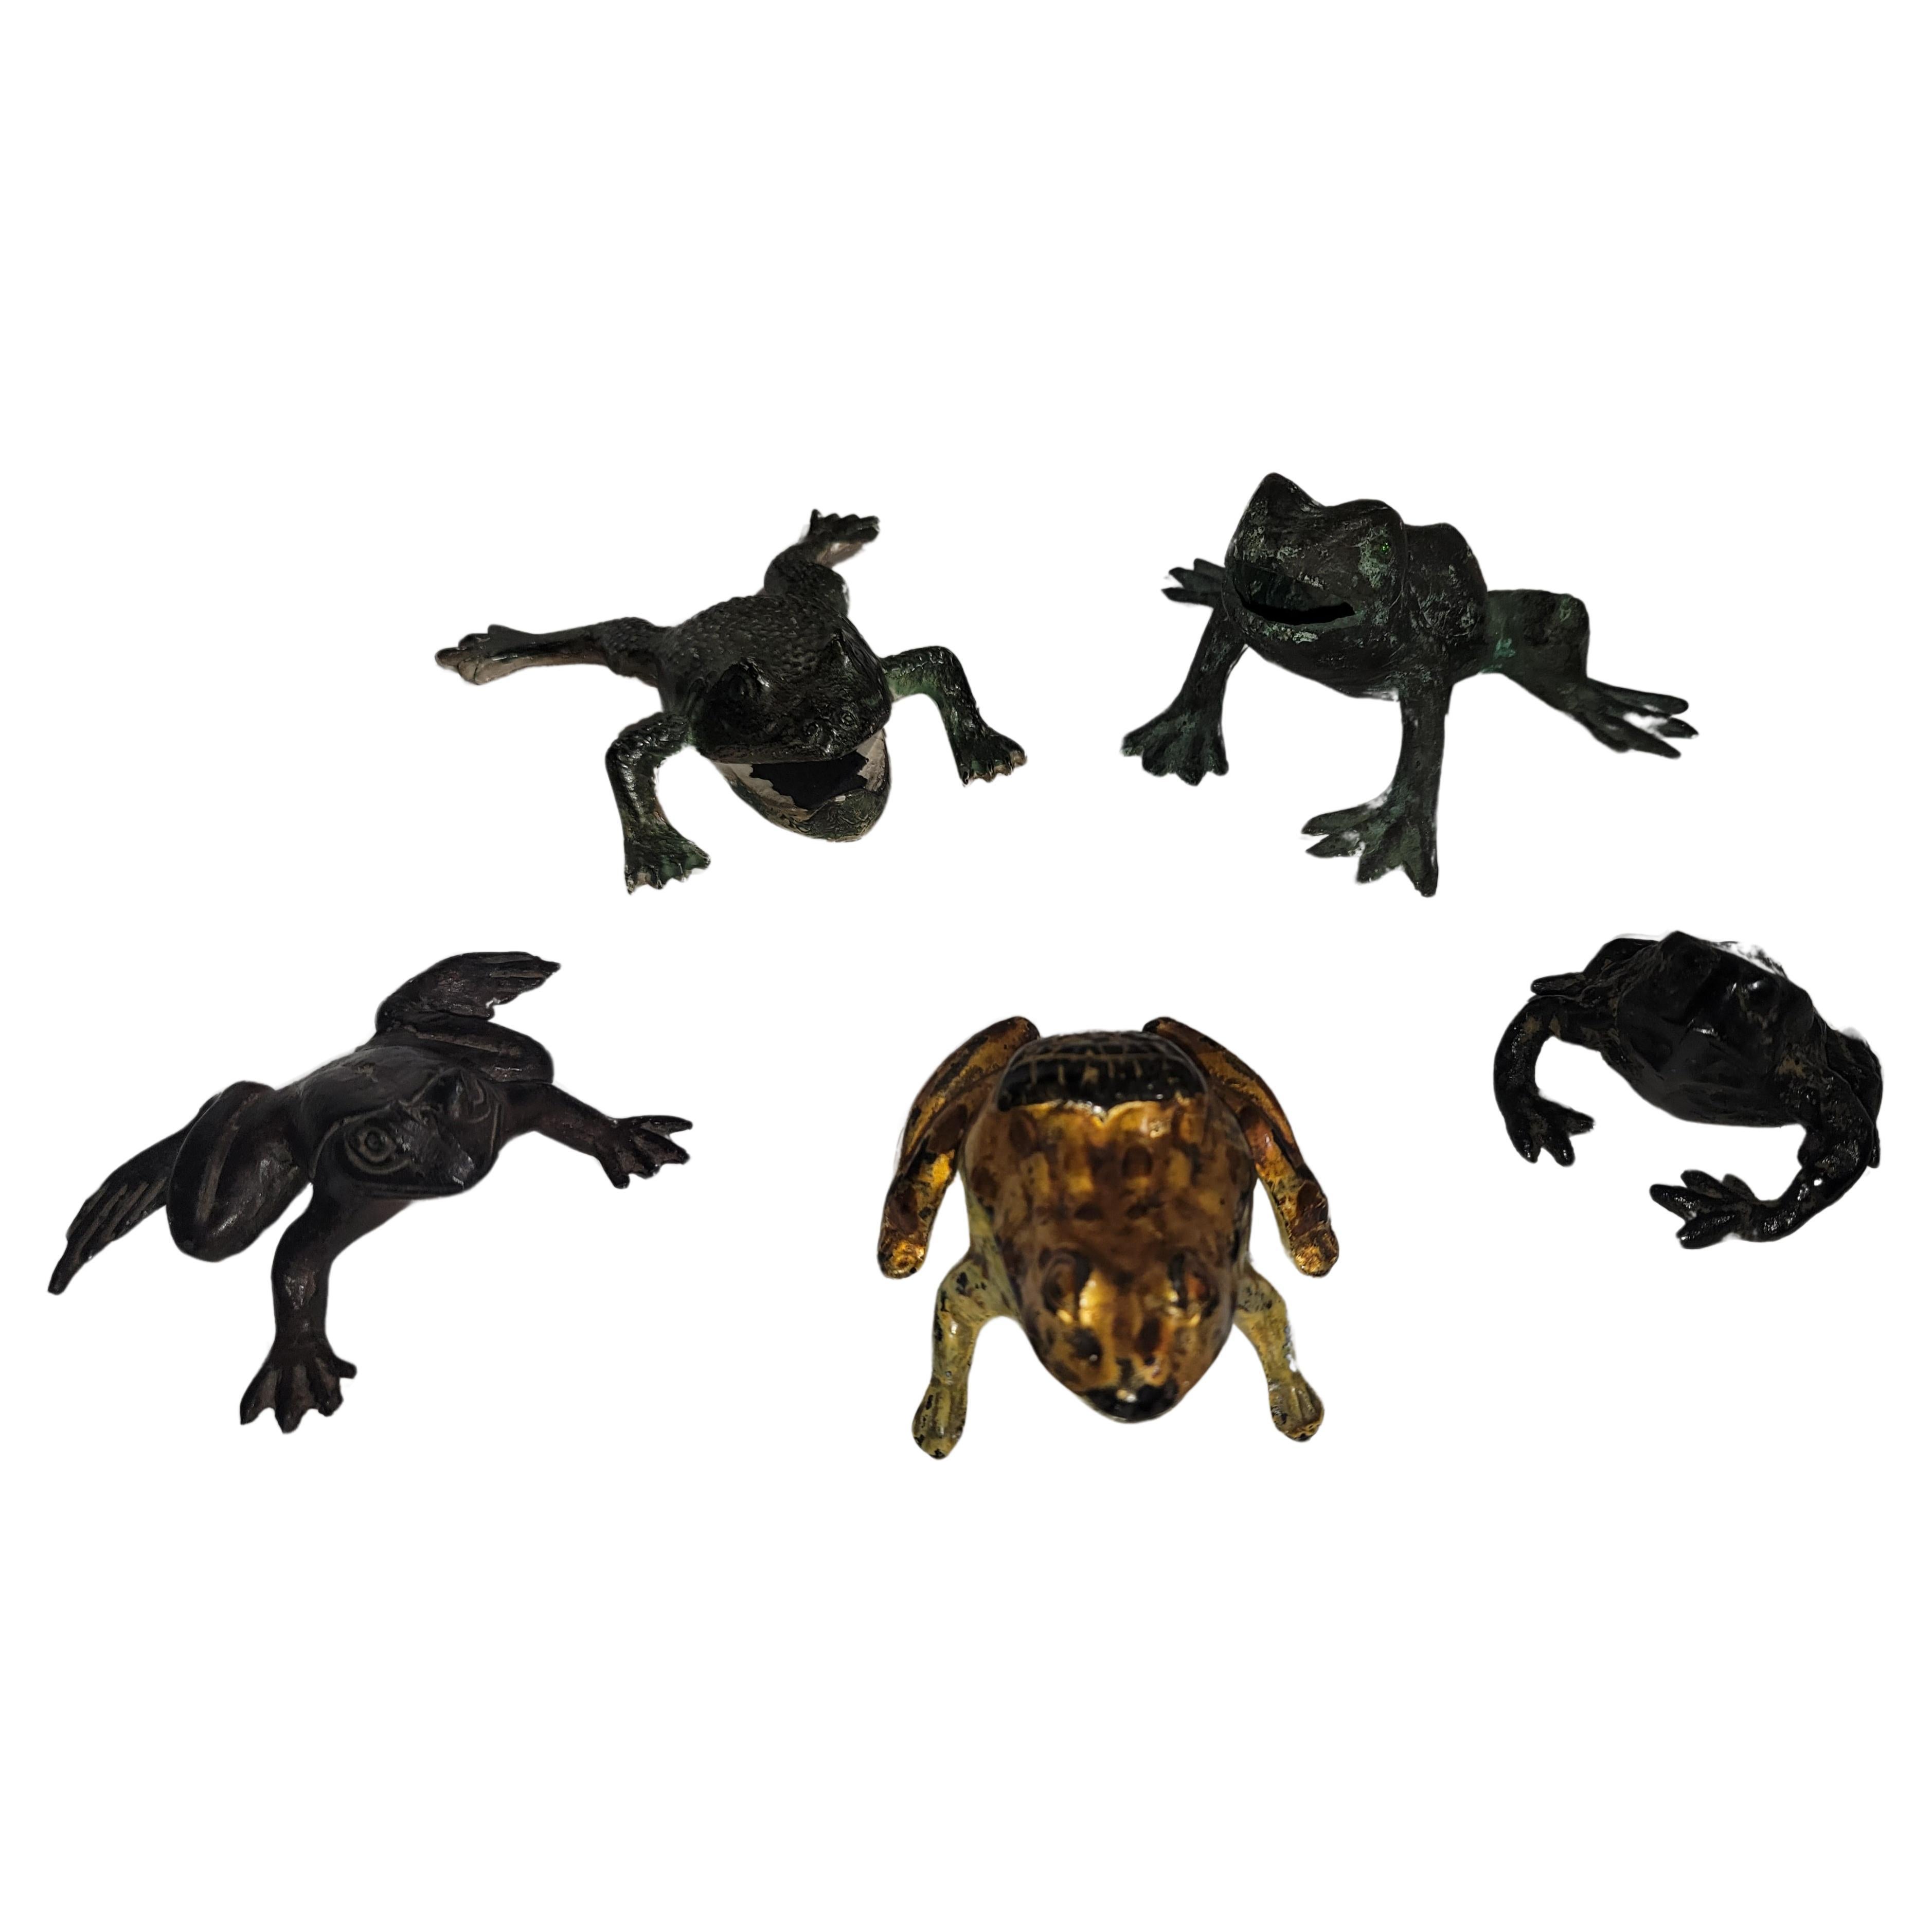 This amazing collection of bronze and iron frogs are all hand made or hand forged.The gilded frog is a advertisement & match safe in one.The others are hand made.